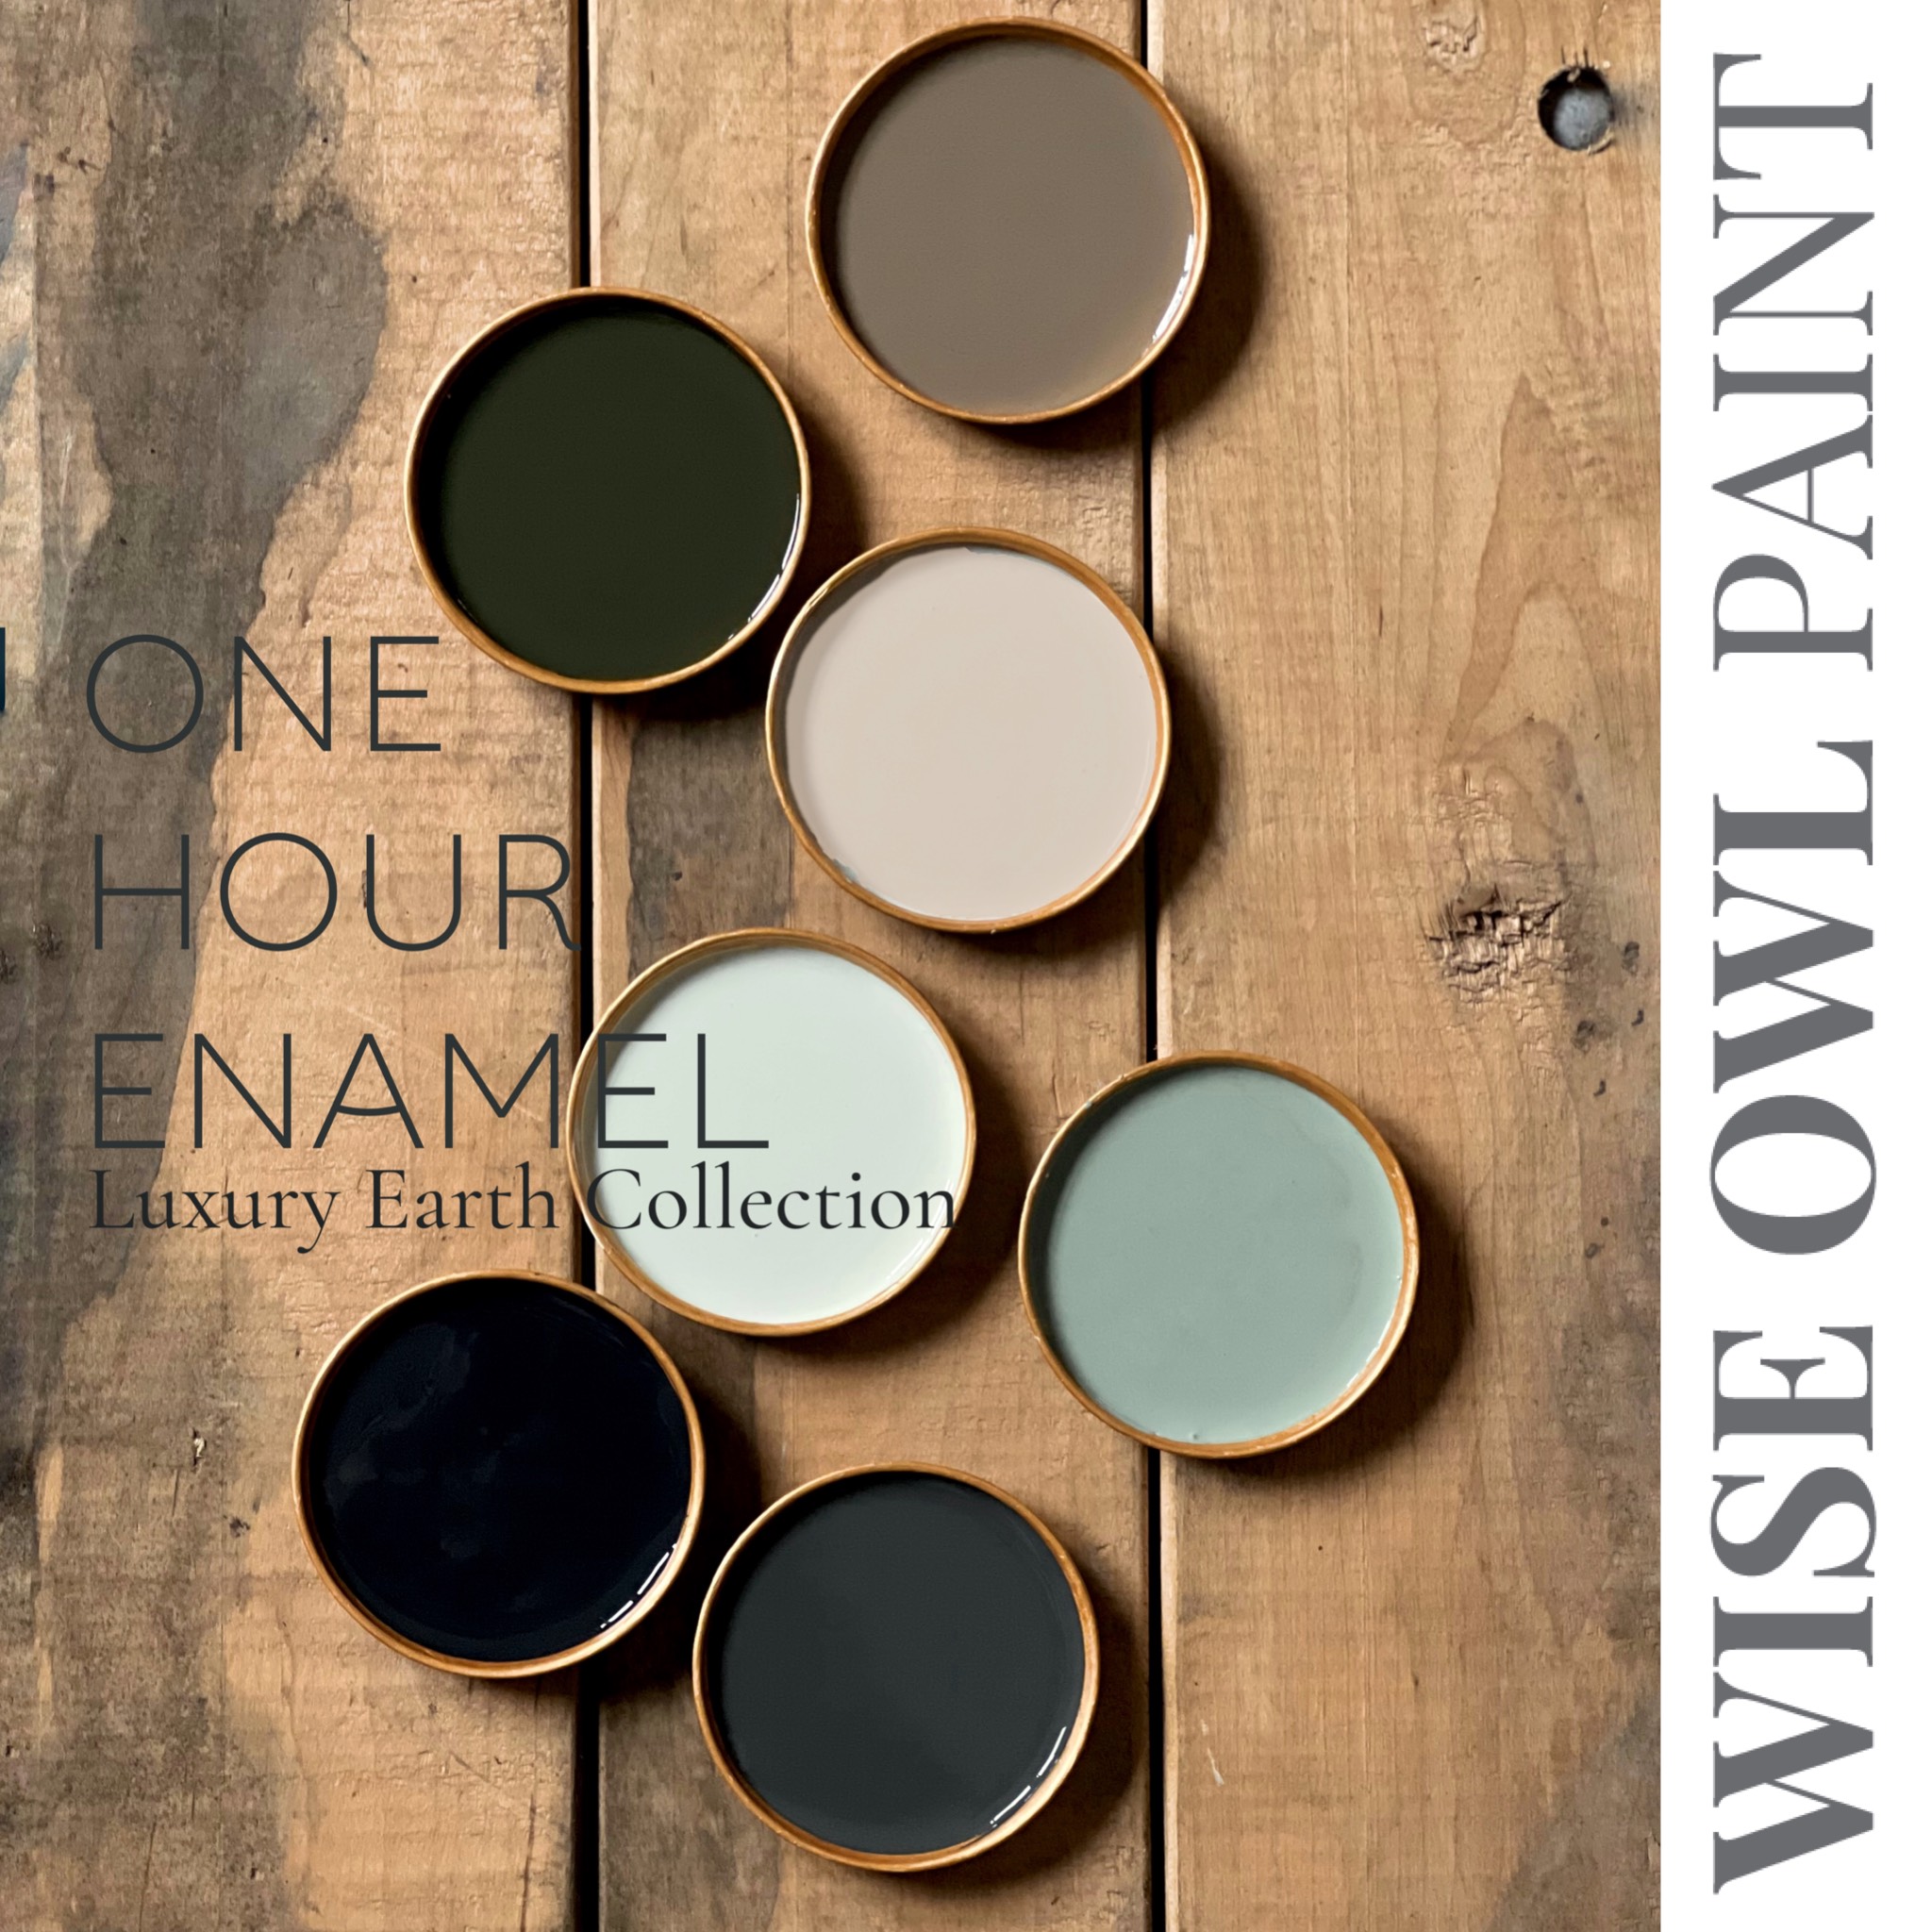 Wise Owl Paint: One Hour Enamel - Weathered Bronze – Remy Restores